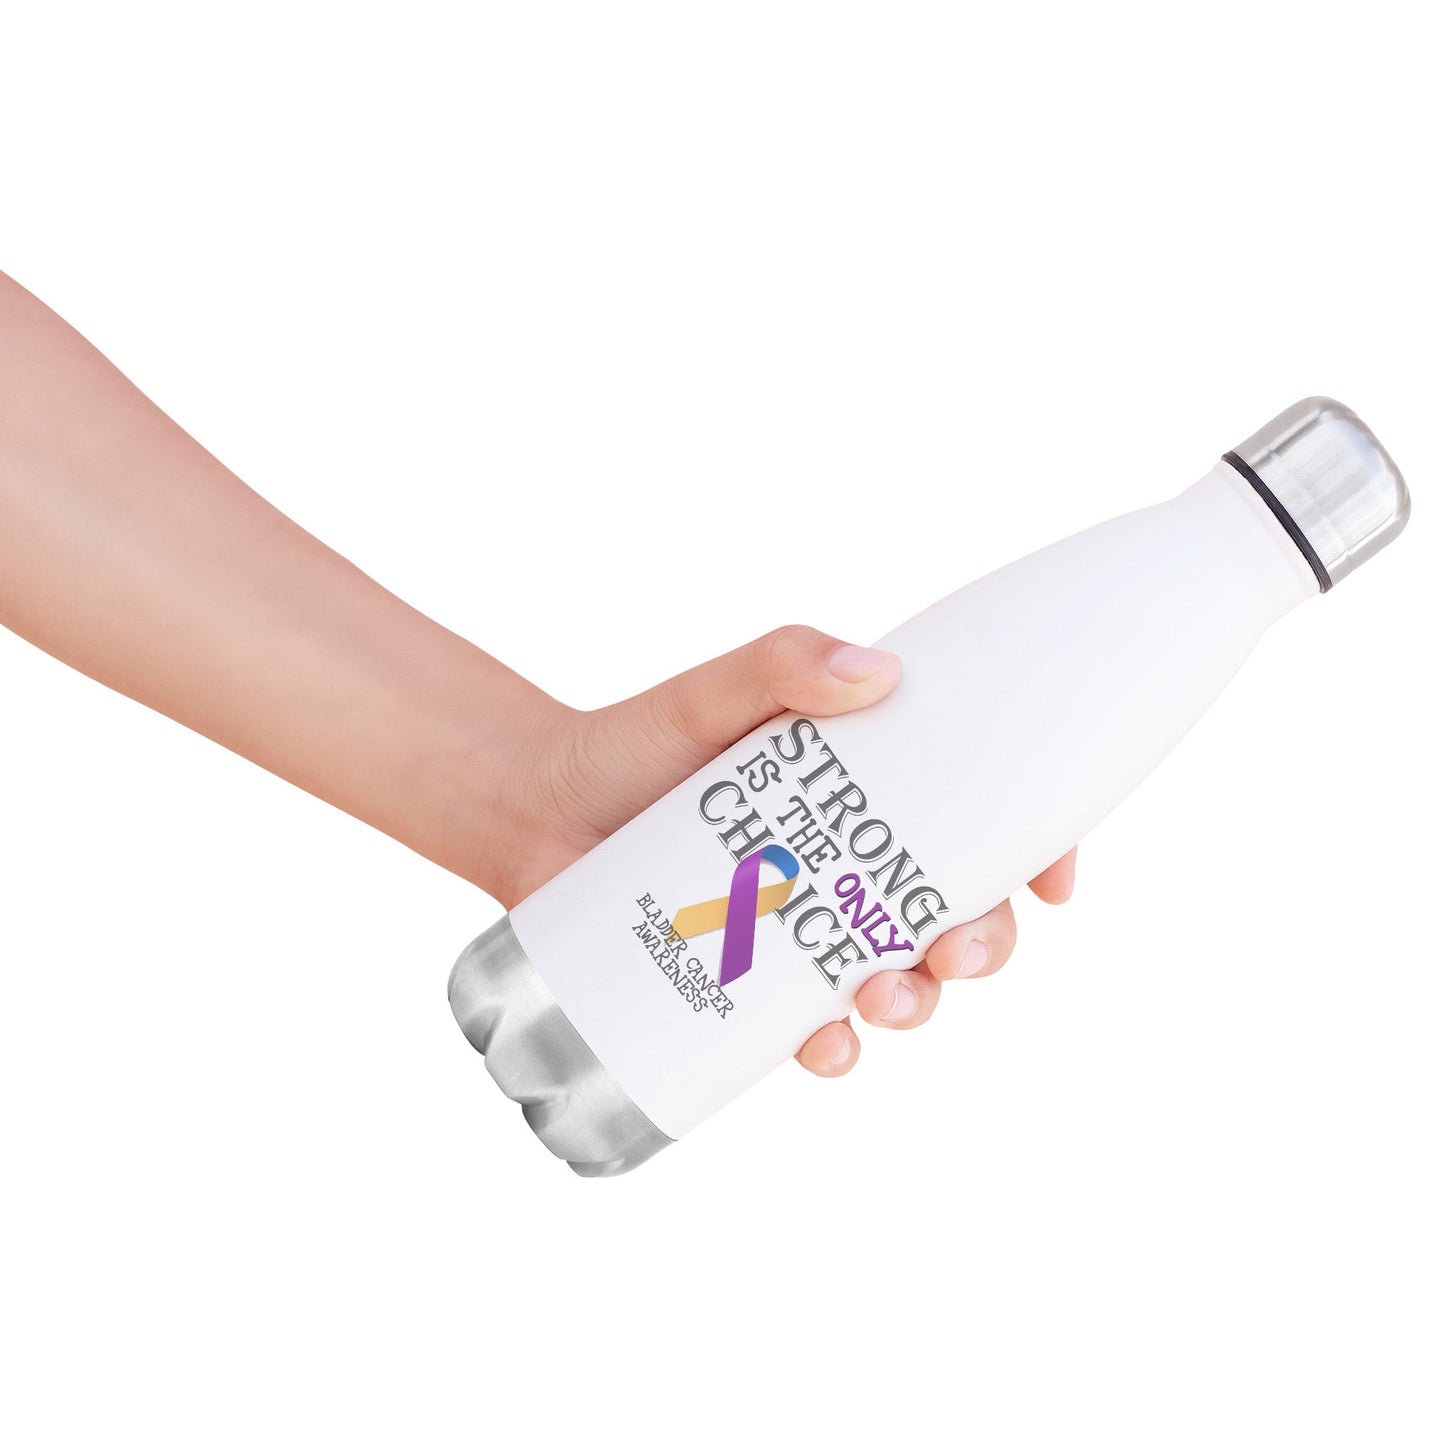 Strong is the Only Choice -Bladder Cancer Awareness 20oz Insulated Water Bottle |x|